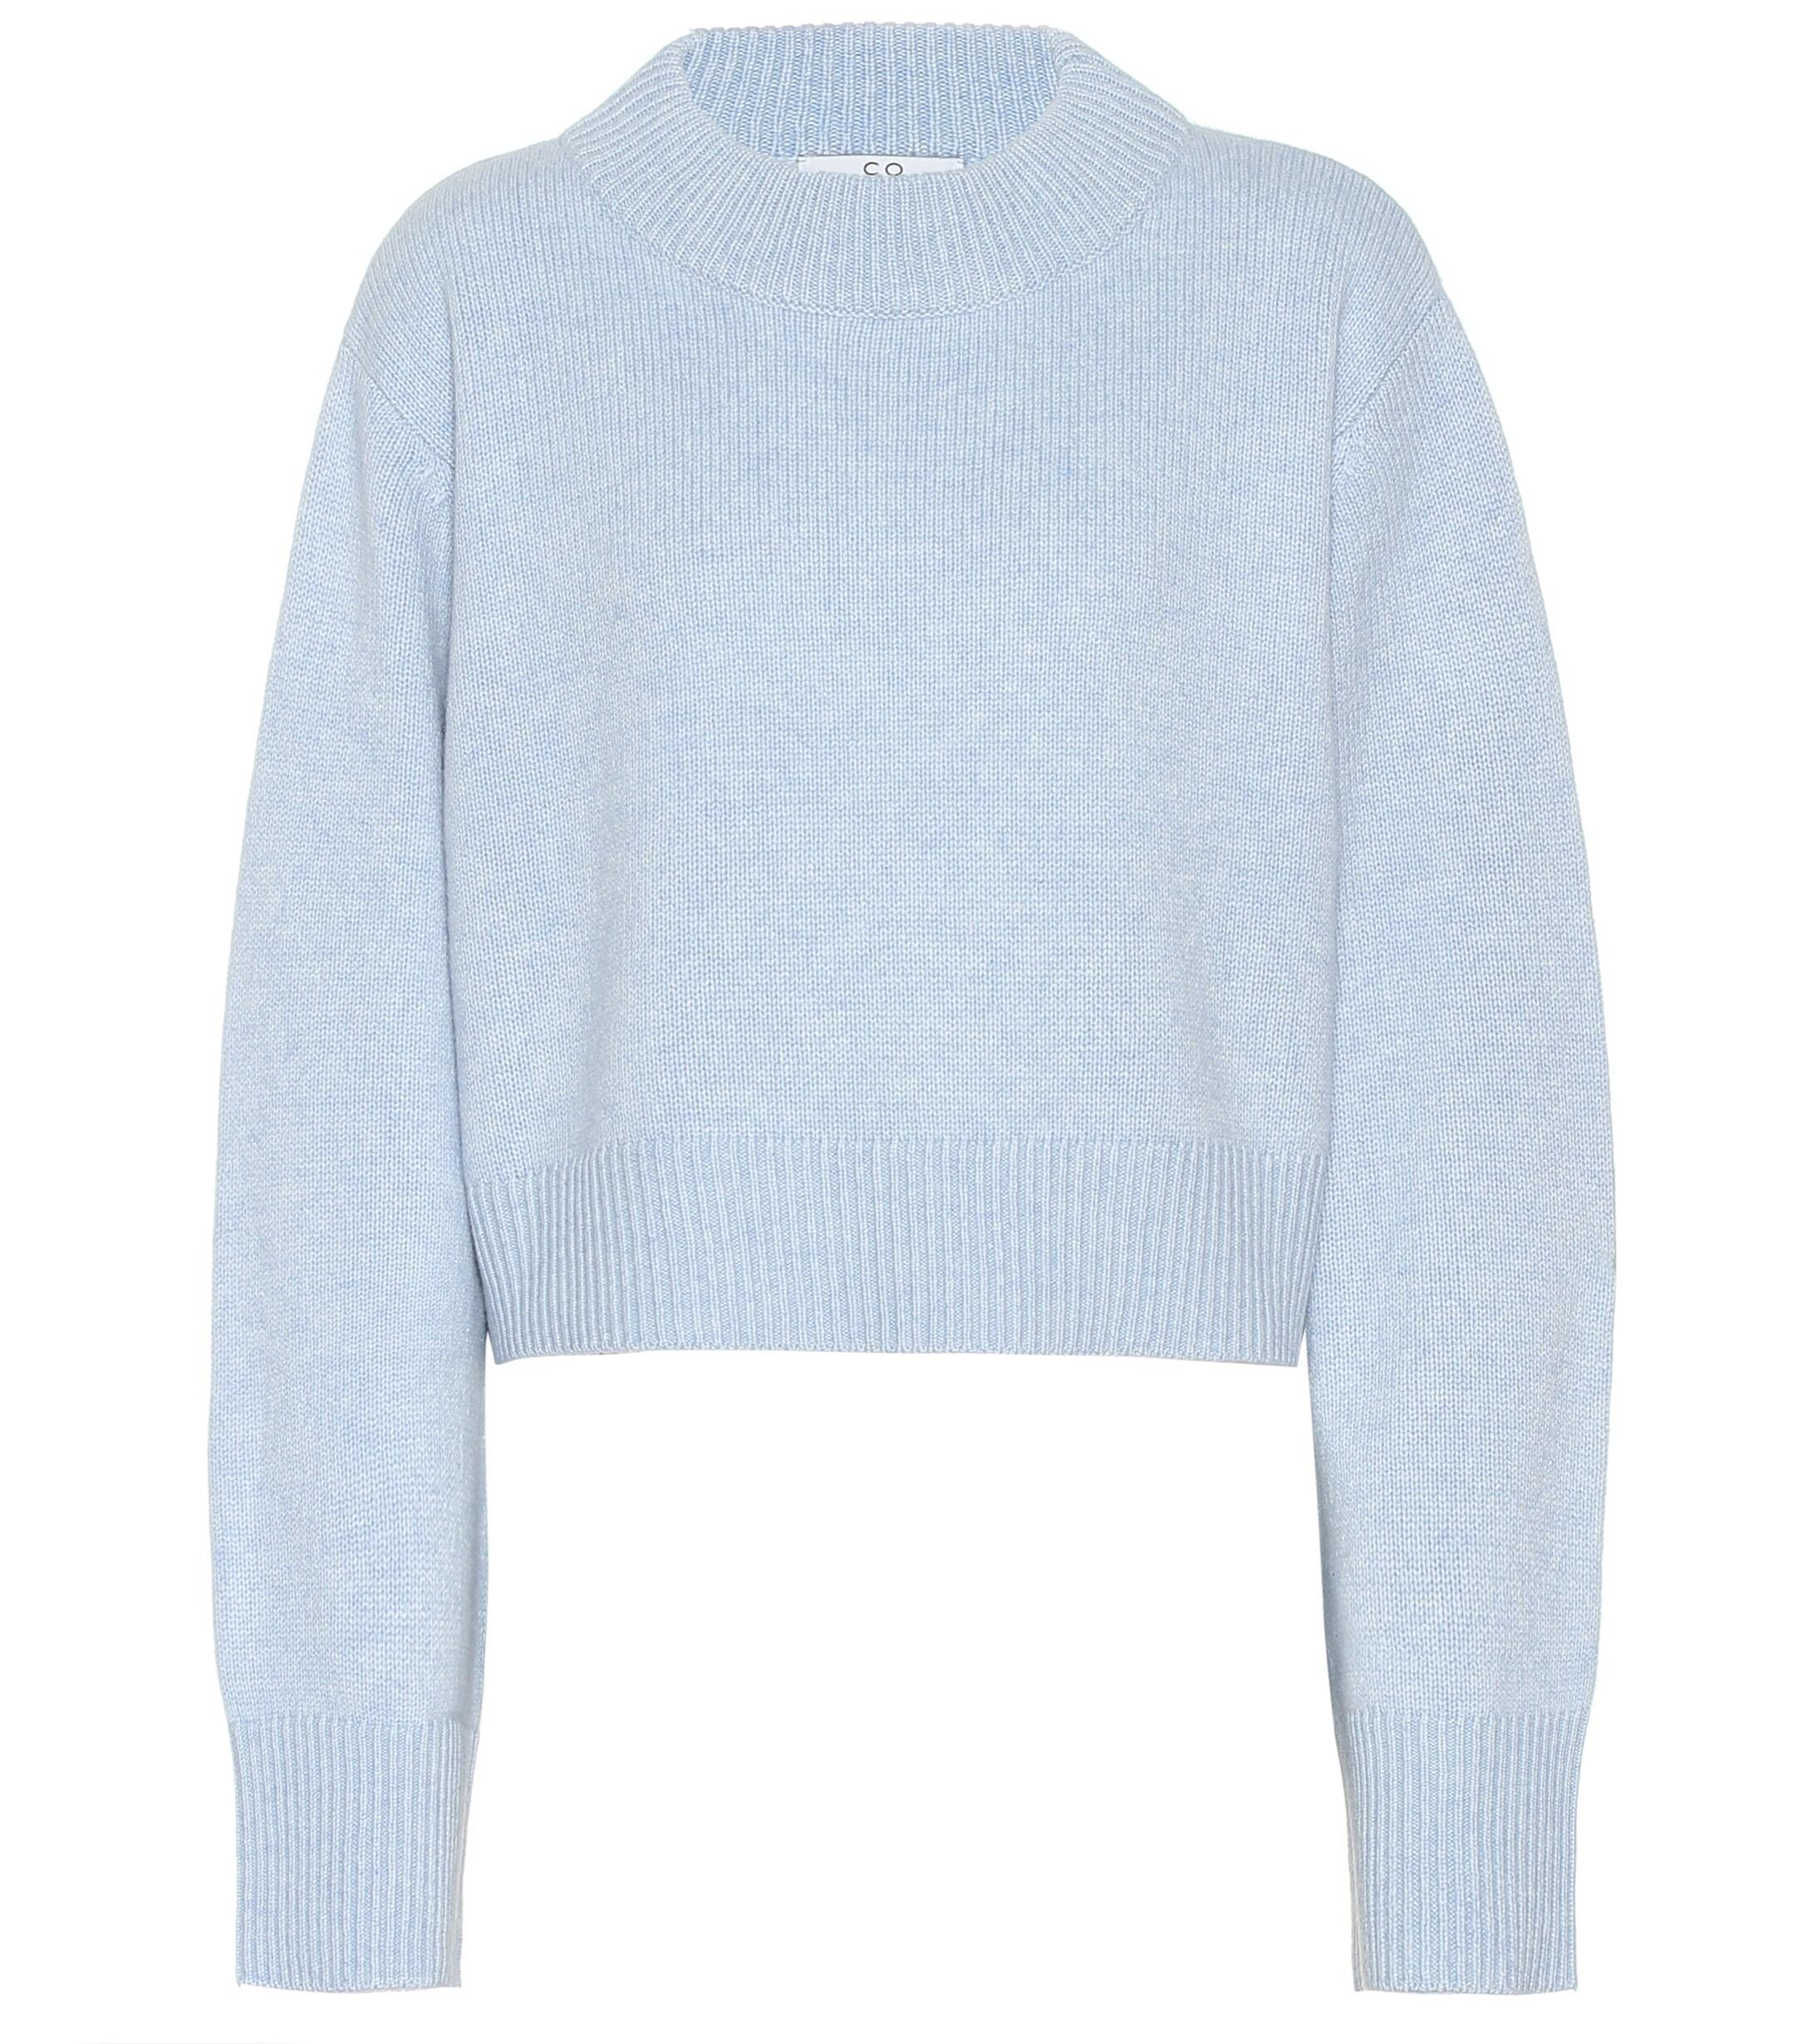 Co. Cropped Cashmere Sweater in Blue | Lyst